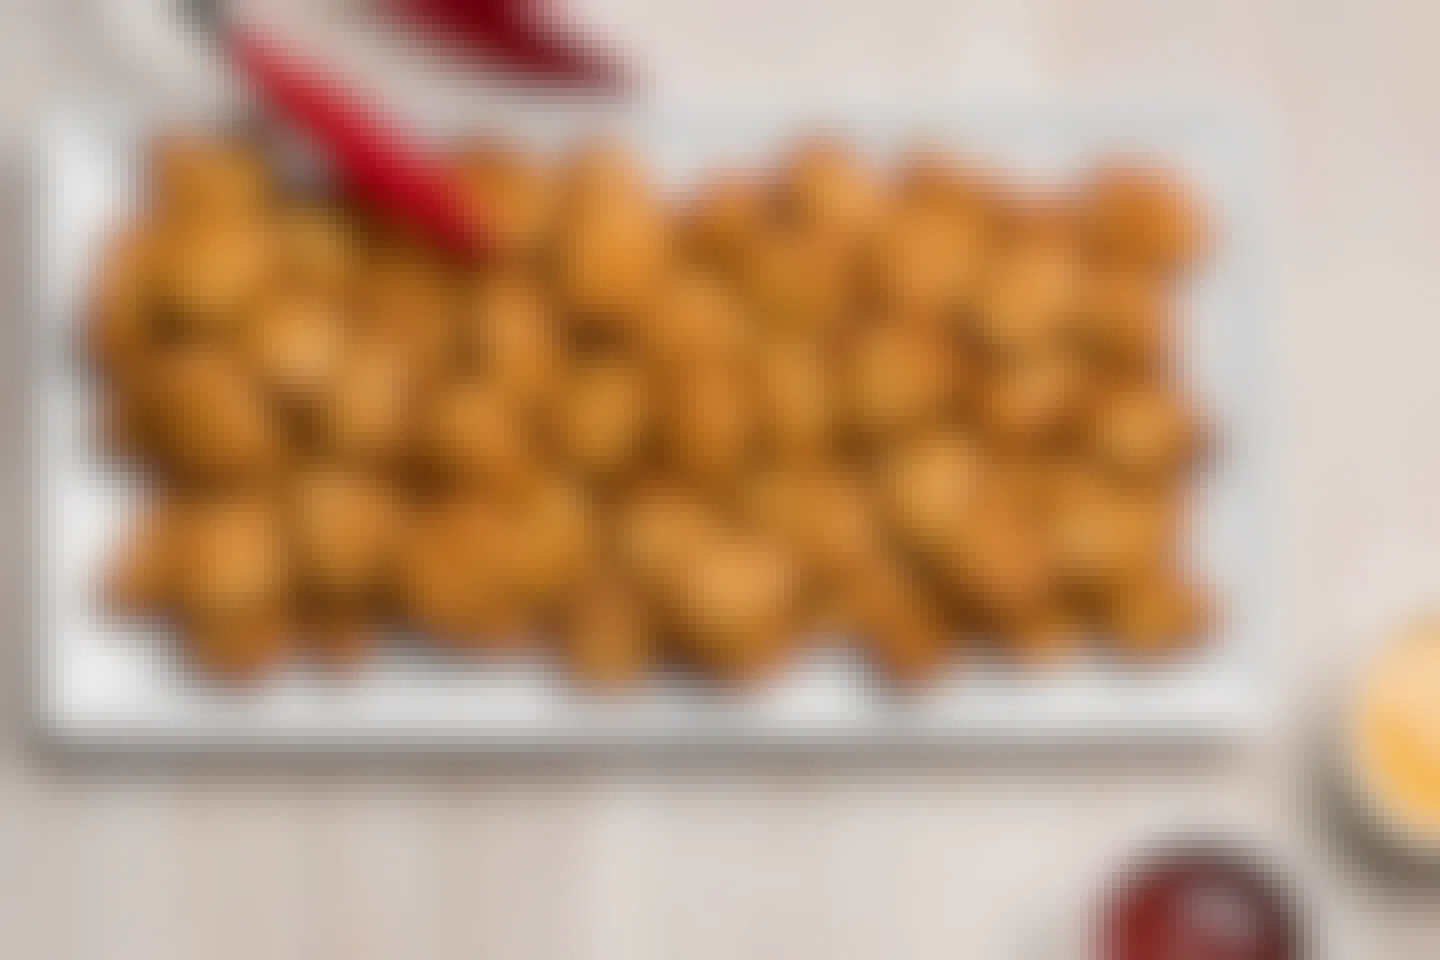 A large platter of Chick-fil-A chicken nuggets on a table next to some tongs and dipping sauces.